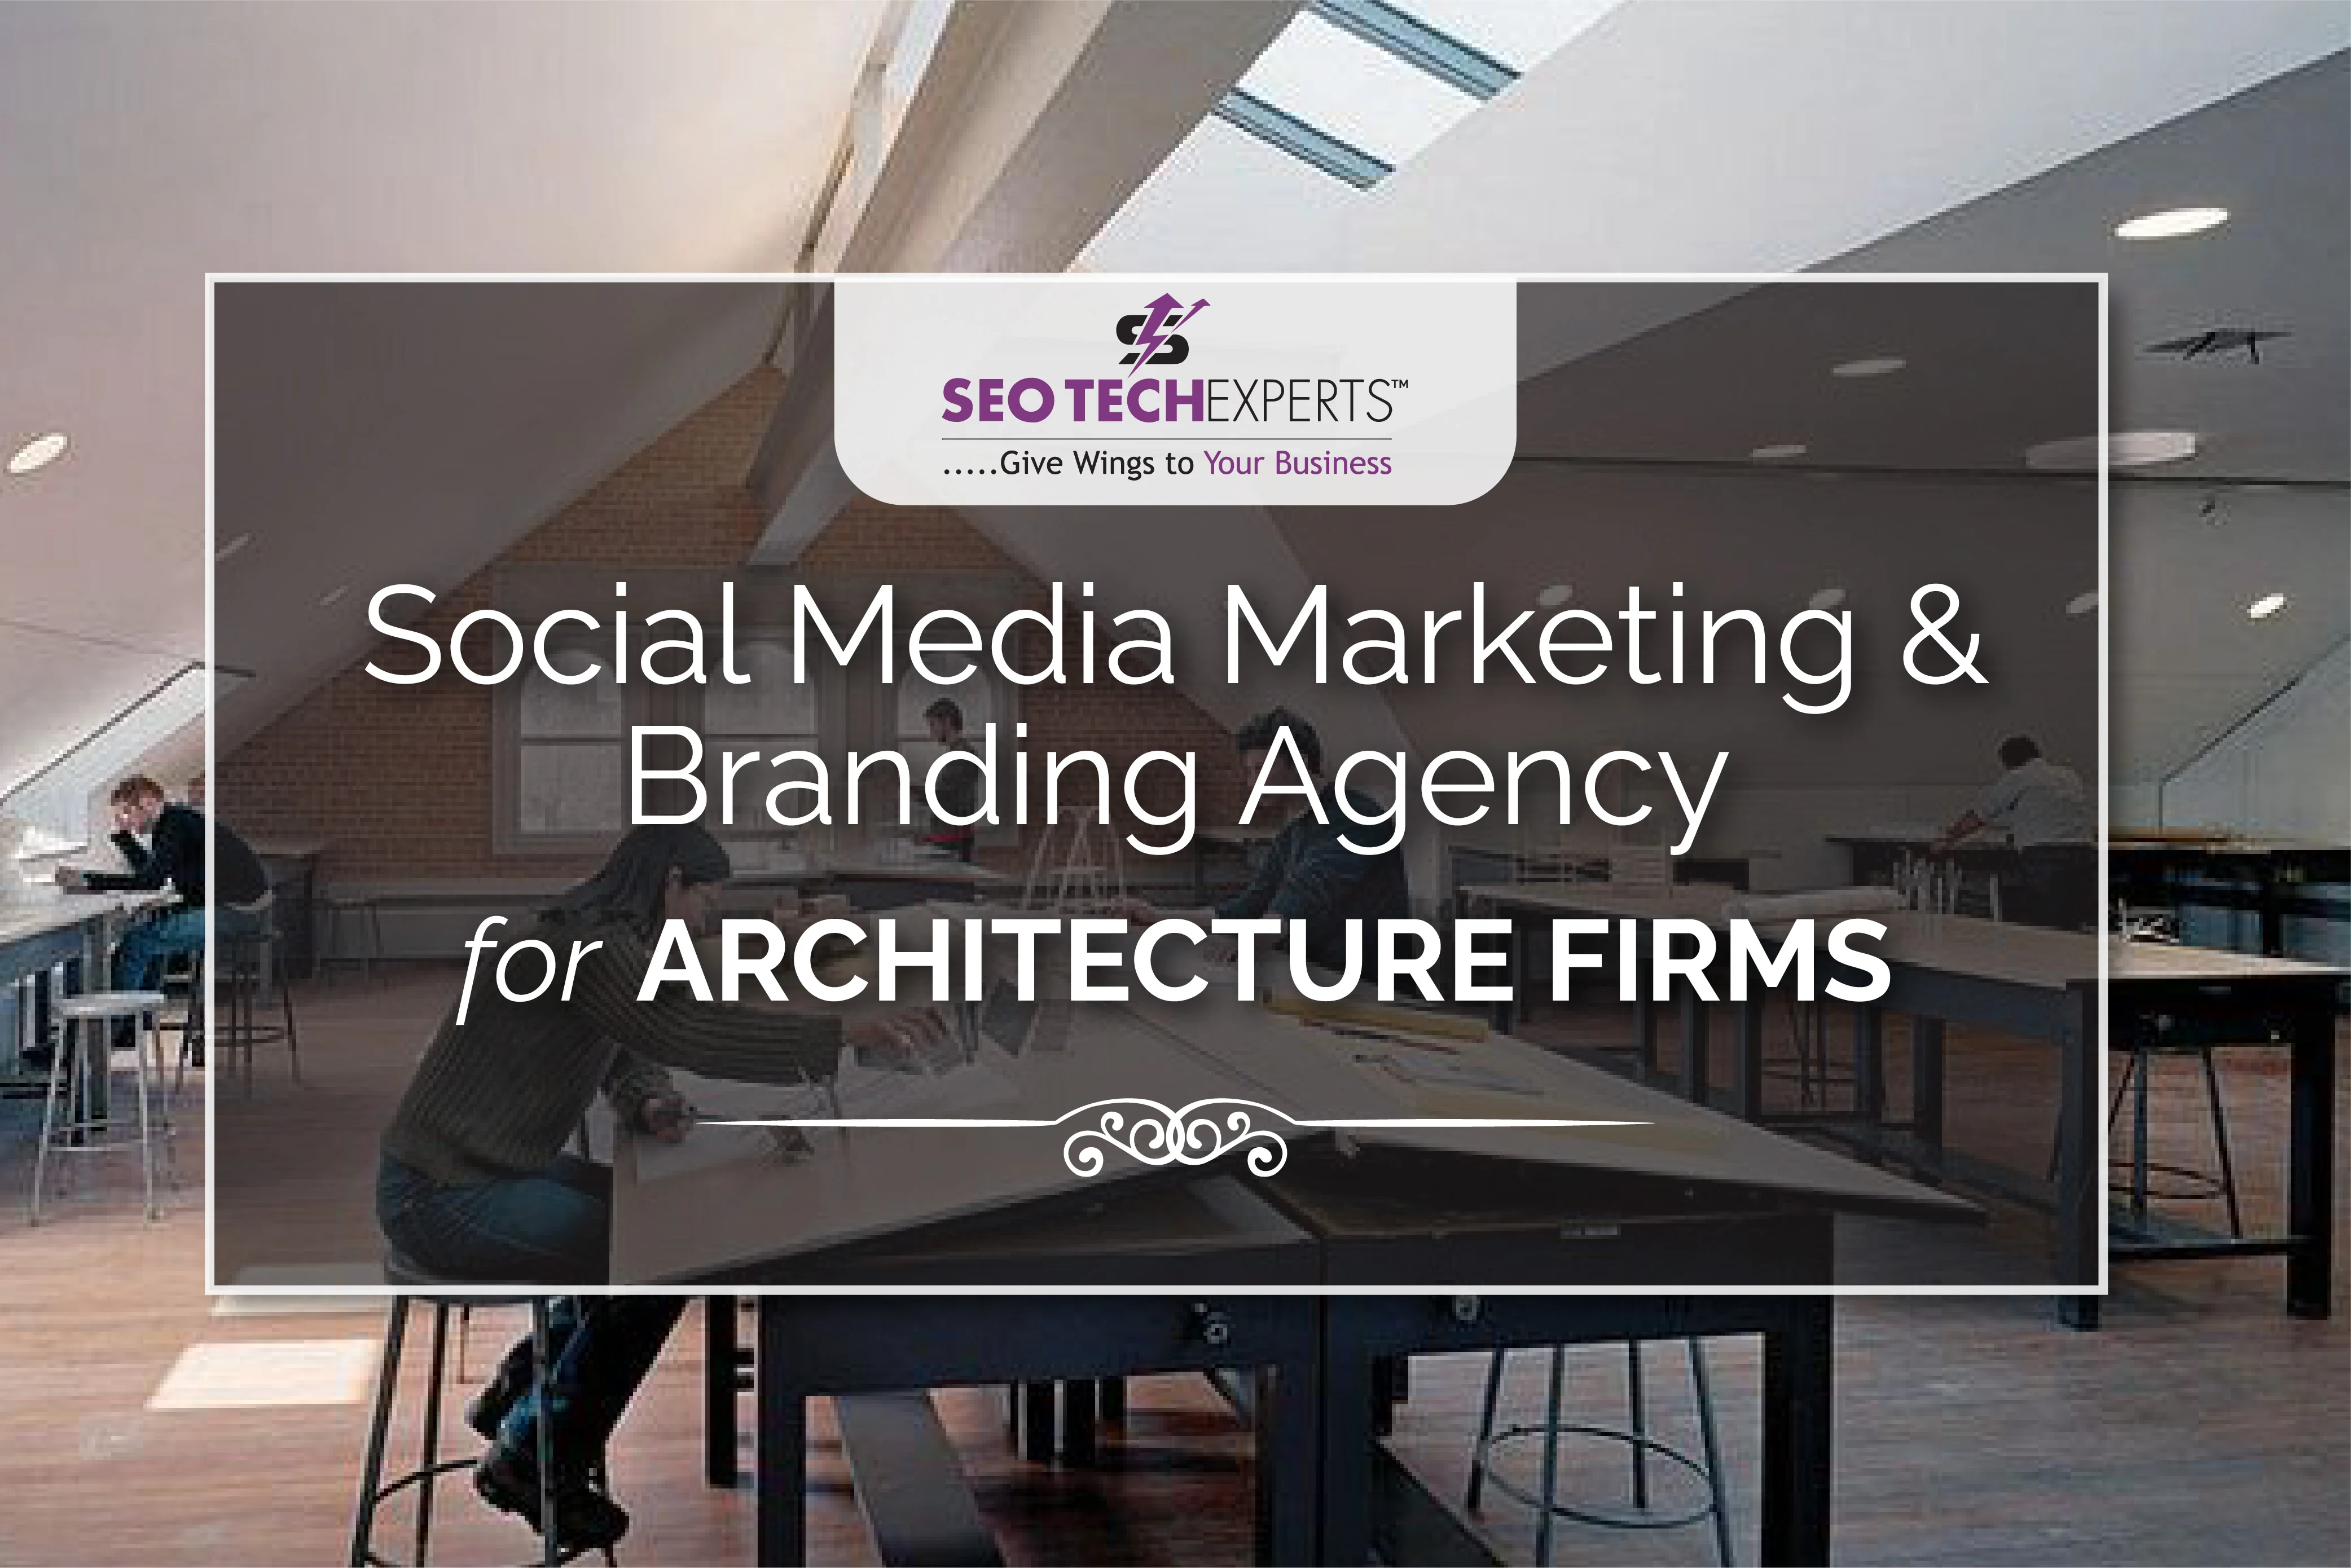 Social Media Marketing and Branding Agency for Architecture Firms in Gurgaon